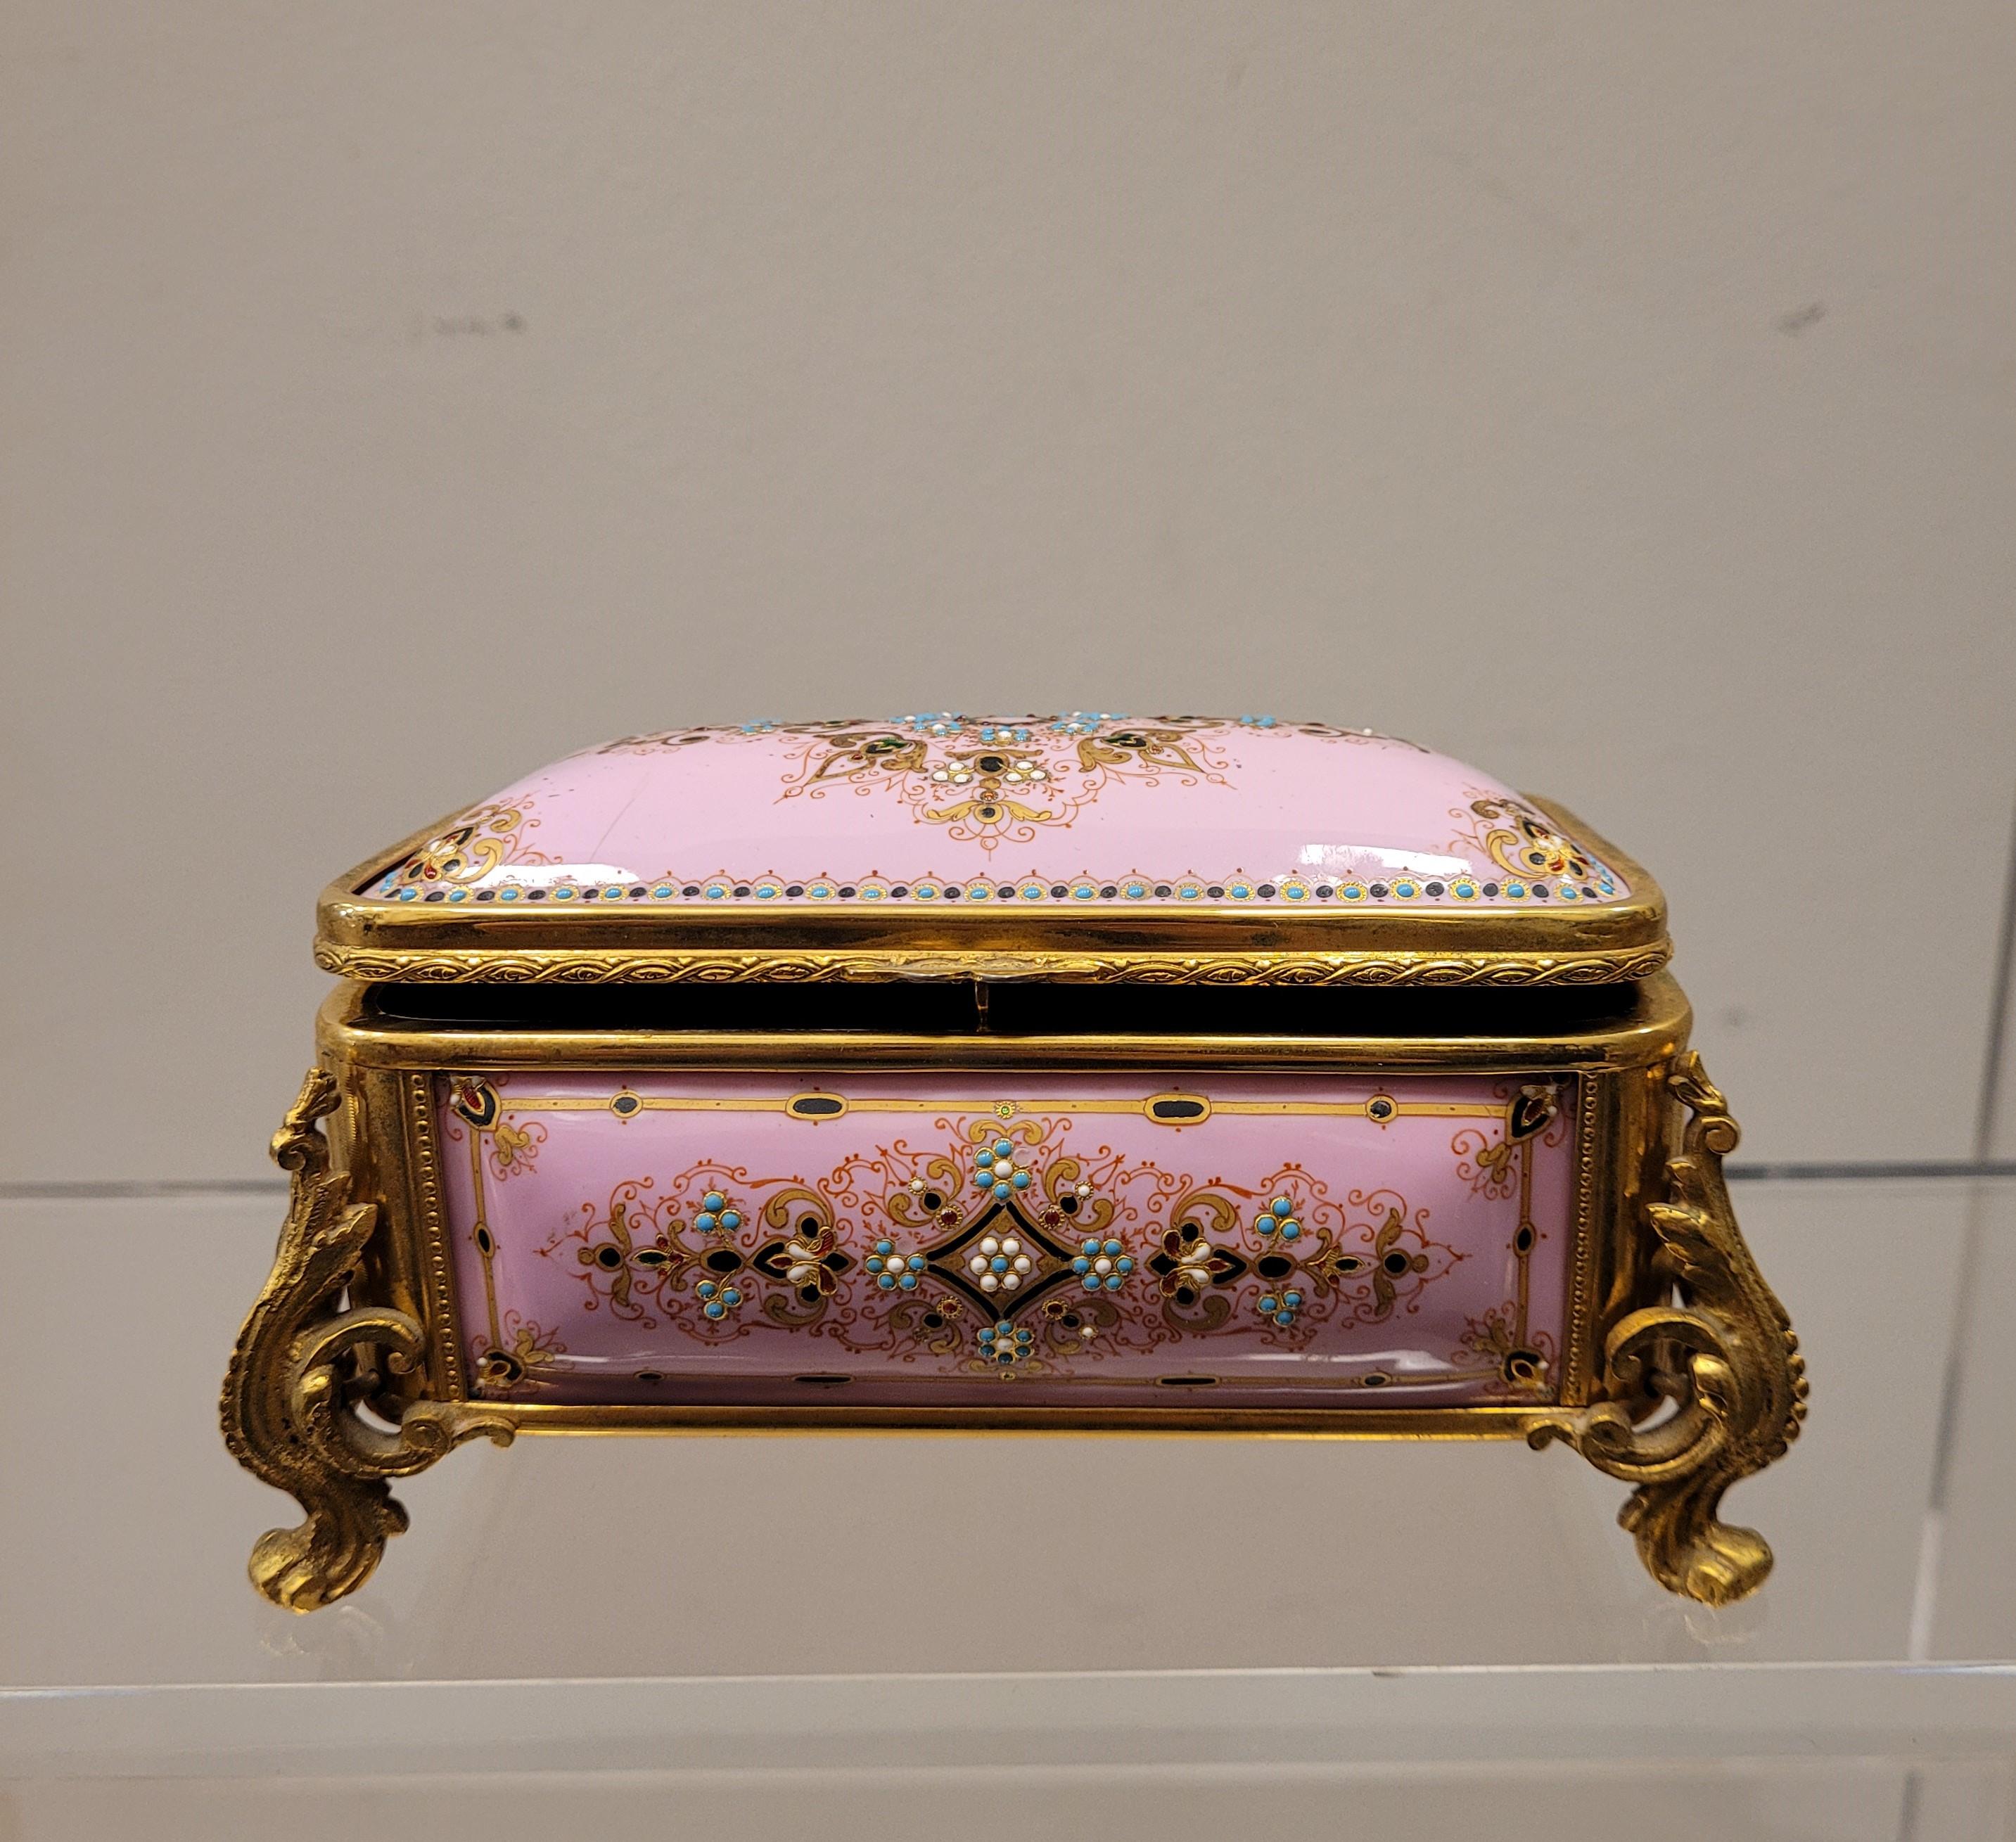 Gorgeous and very beautiful small jewelry box – Napoleon III style jewelry box, also called Second Empire. It has a very Rococo design. Rococo tends towards fanciful, dynamic and curvilinear forms worked in infinite intertwining. In this piece,